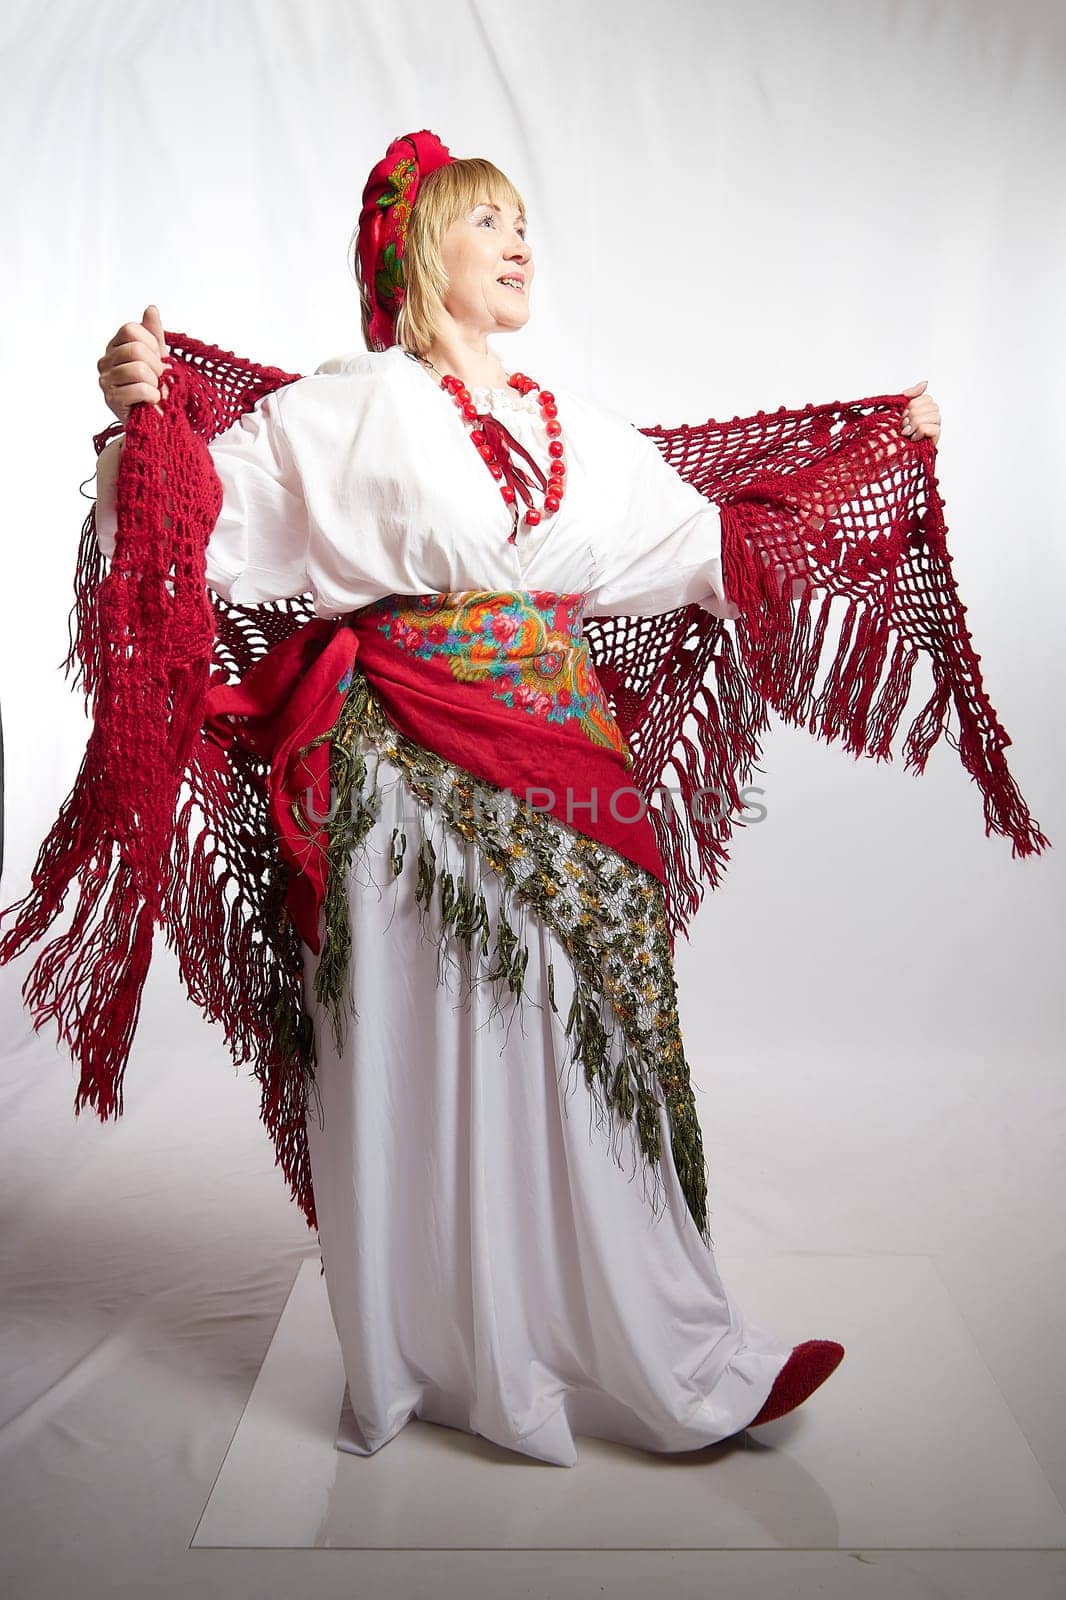 Cheerful funny adult mature woman solokha in a red knitted shawl. Female model in clothes of national ethnic Slavic style. Stylized Ukrainian, Belarusian or Russian woman poses in comic photo shoot